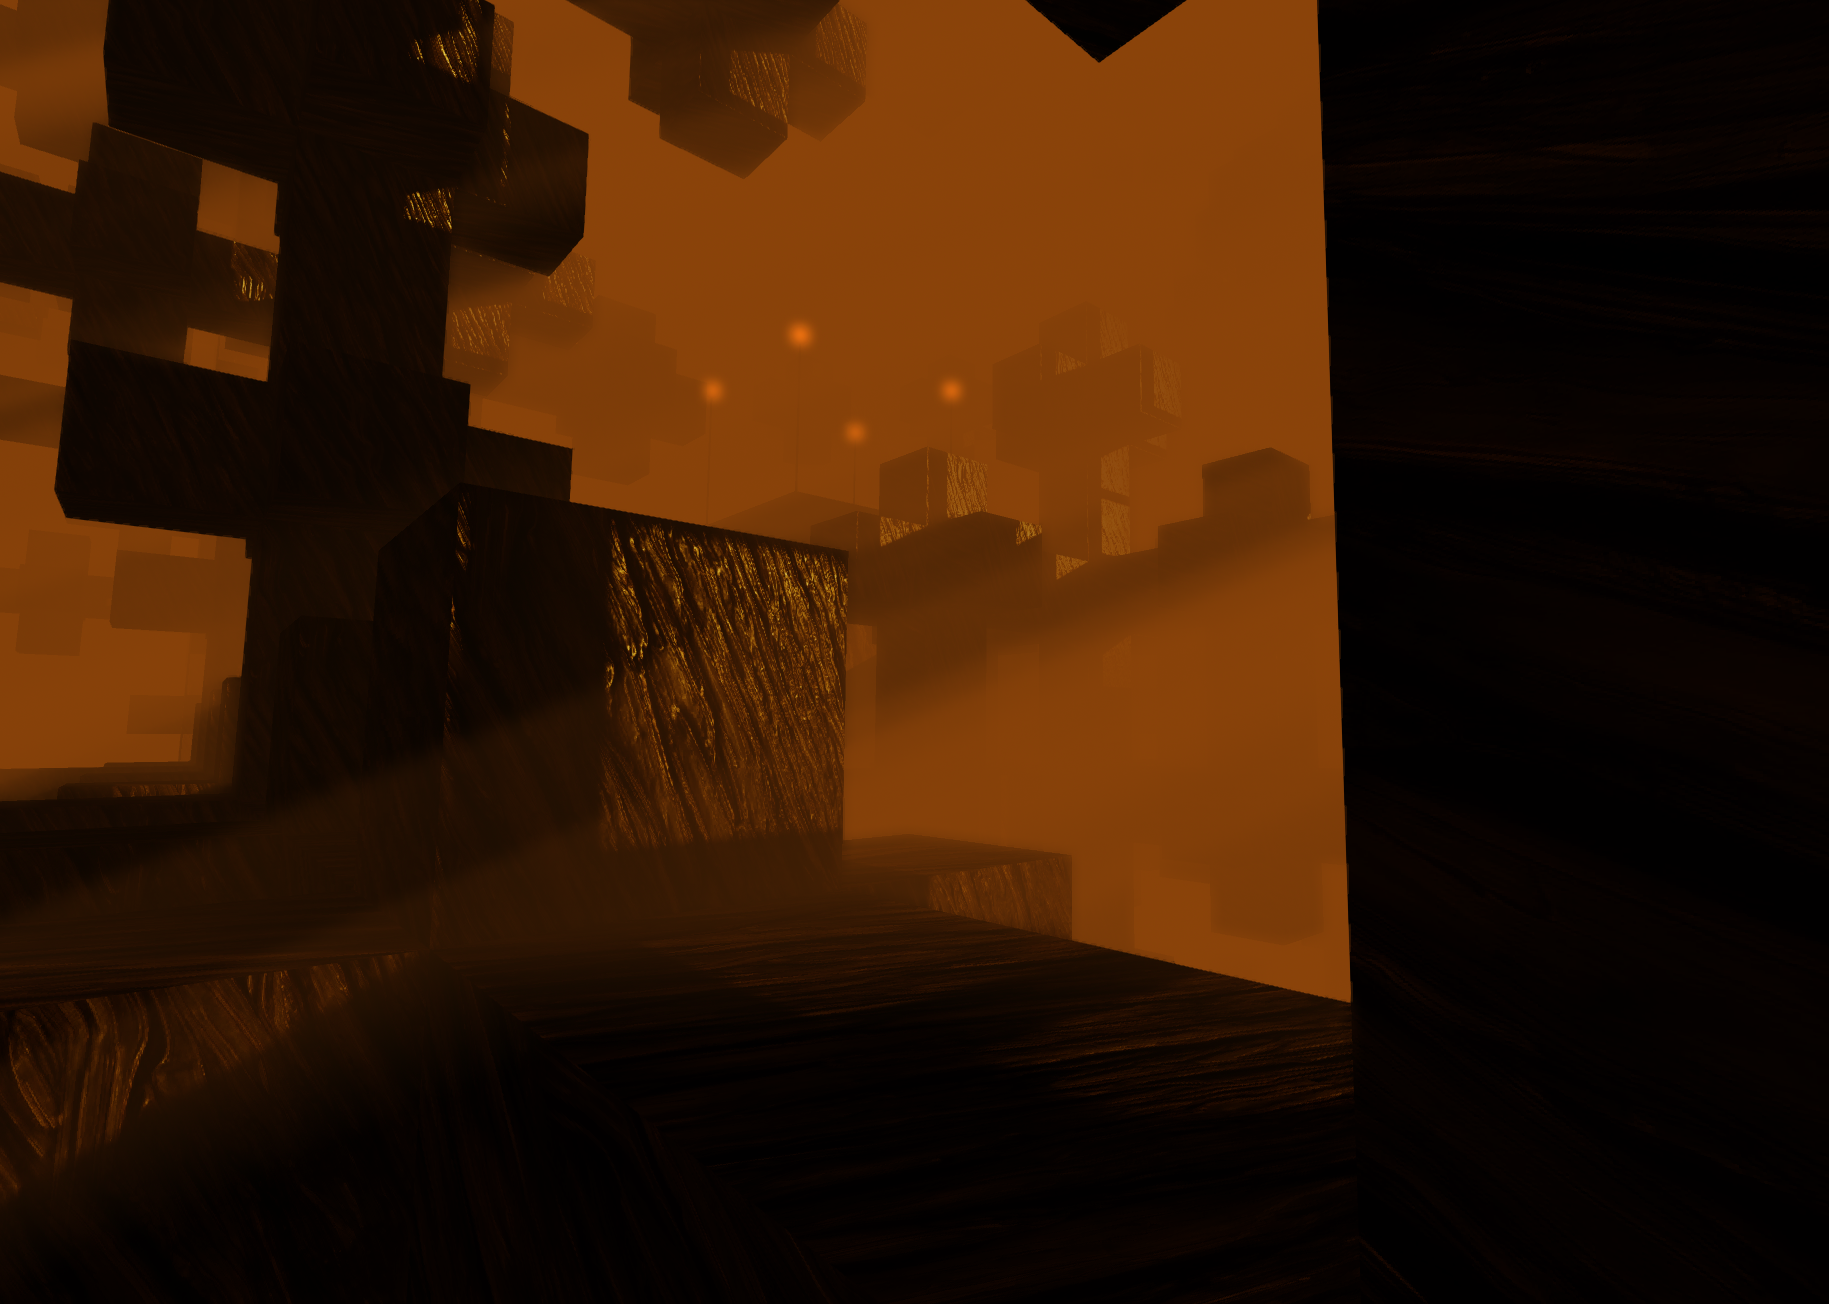 A screenshot of the "smoke" level.  Shows intense orange fog, floating fractal structures composed out of large dark cubes with stone-like texturing and patterns, and four orange/yellow lights glowing in the distance supported by long poles.